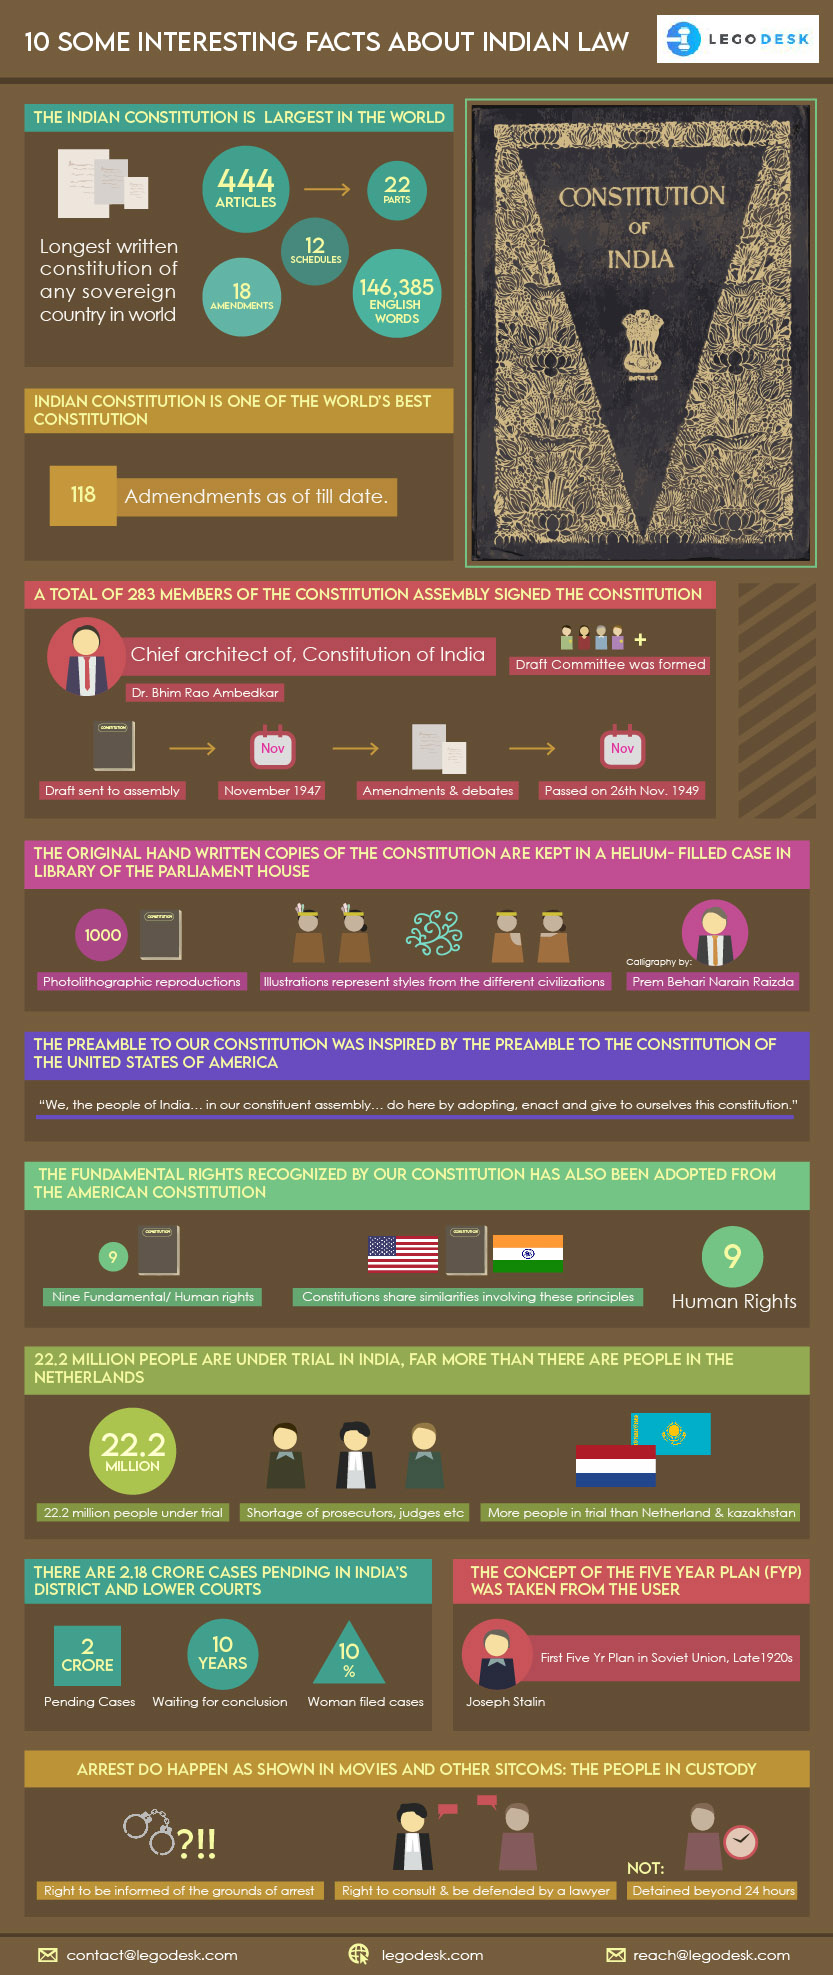 Facts about Indian Law